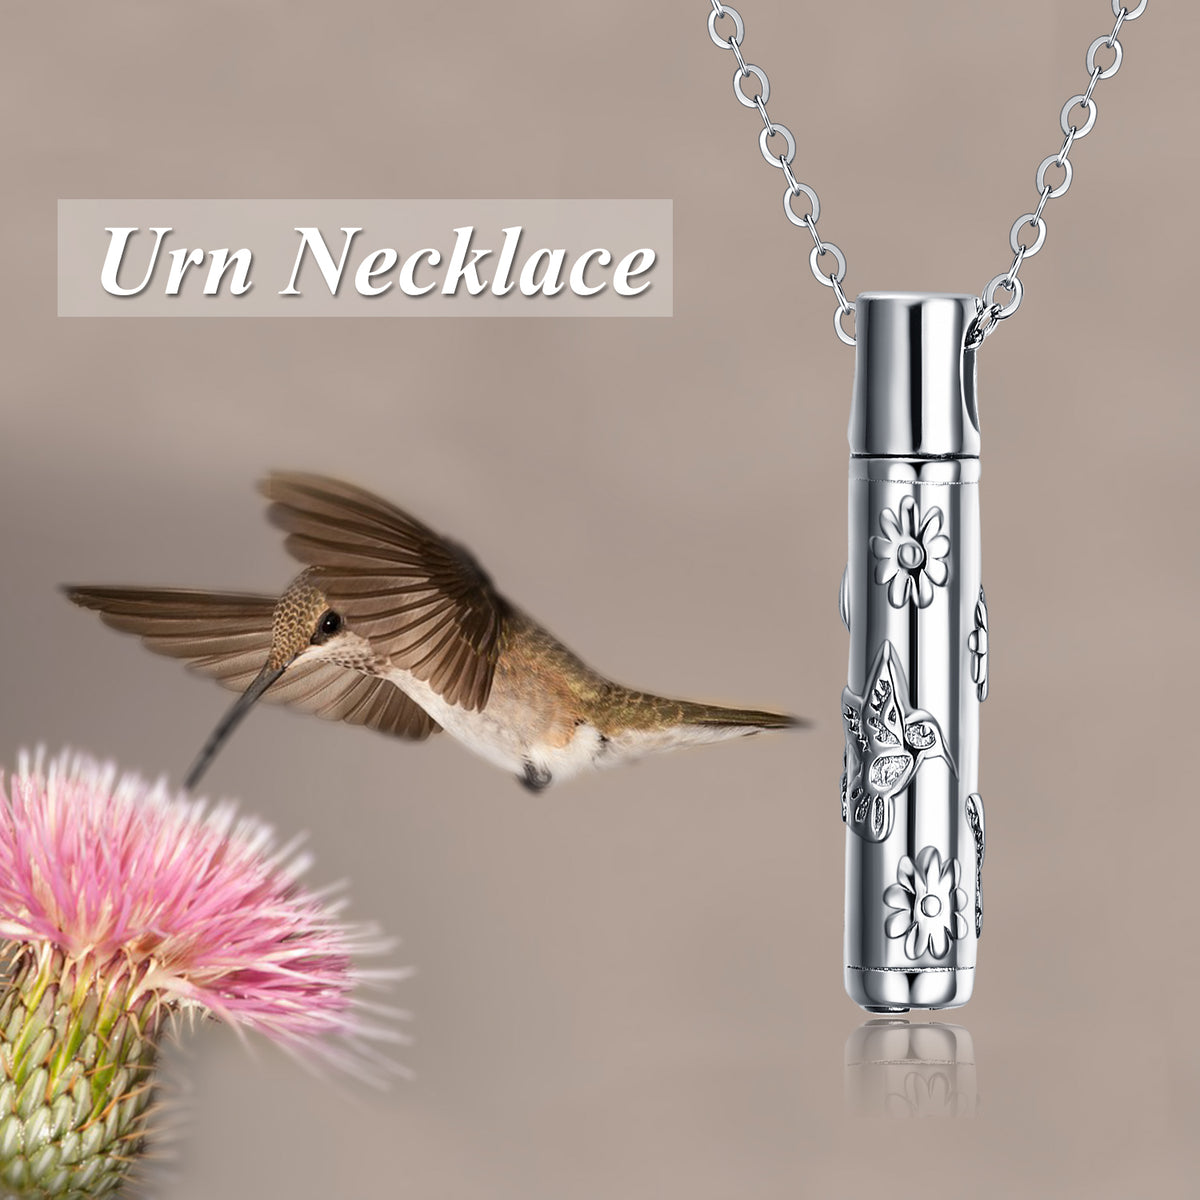 Hummingbird Cremation Jewelry Urn Necklace Ashes Sterling Silver Hummingbird Jewelry for Women Angelwarriorfitness.com